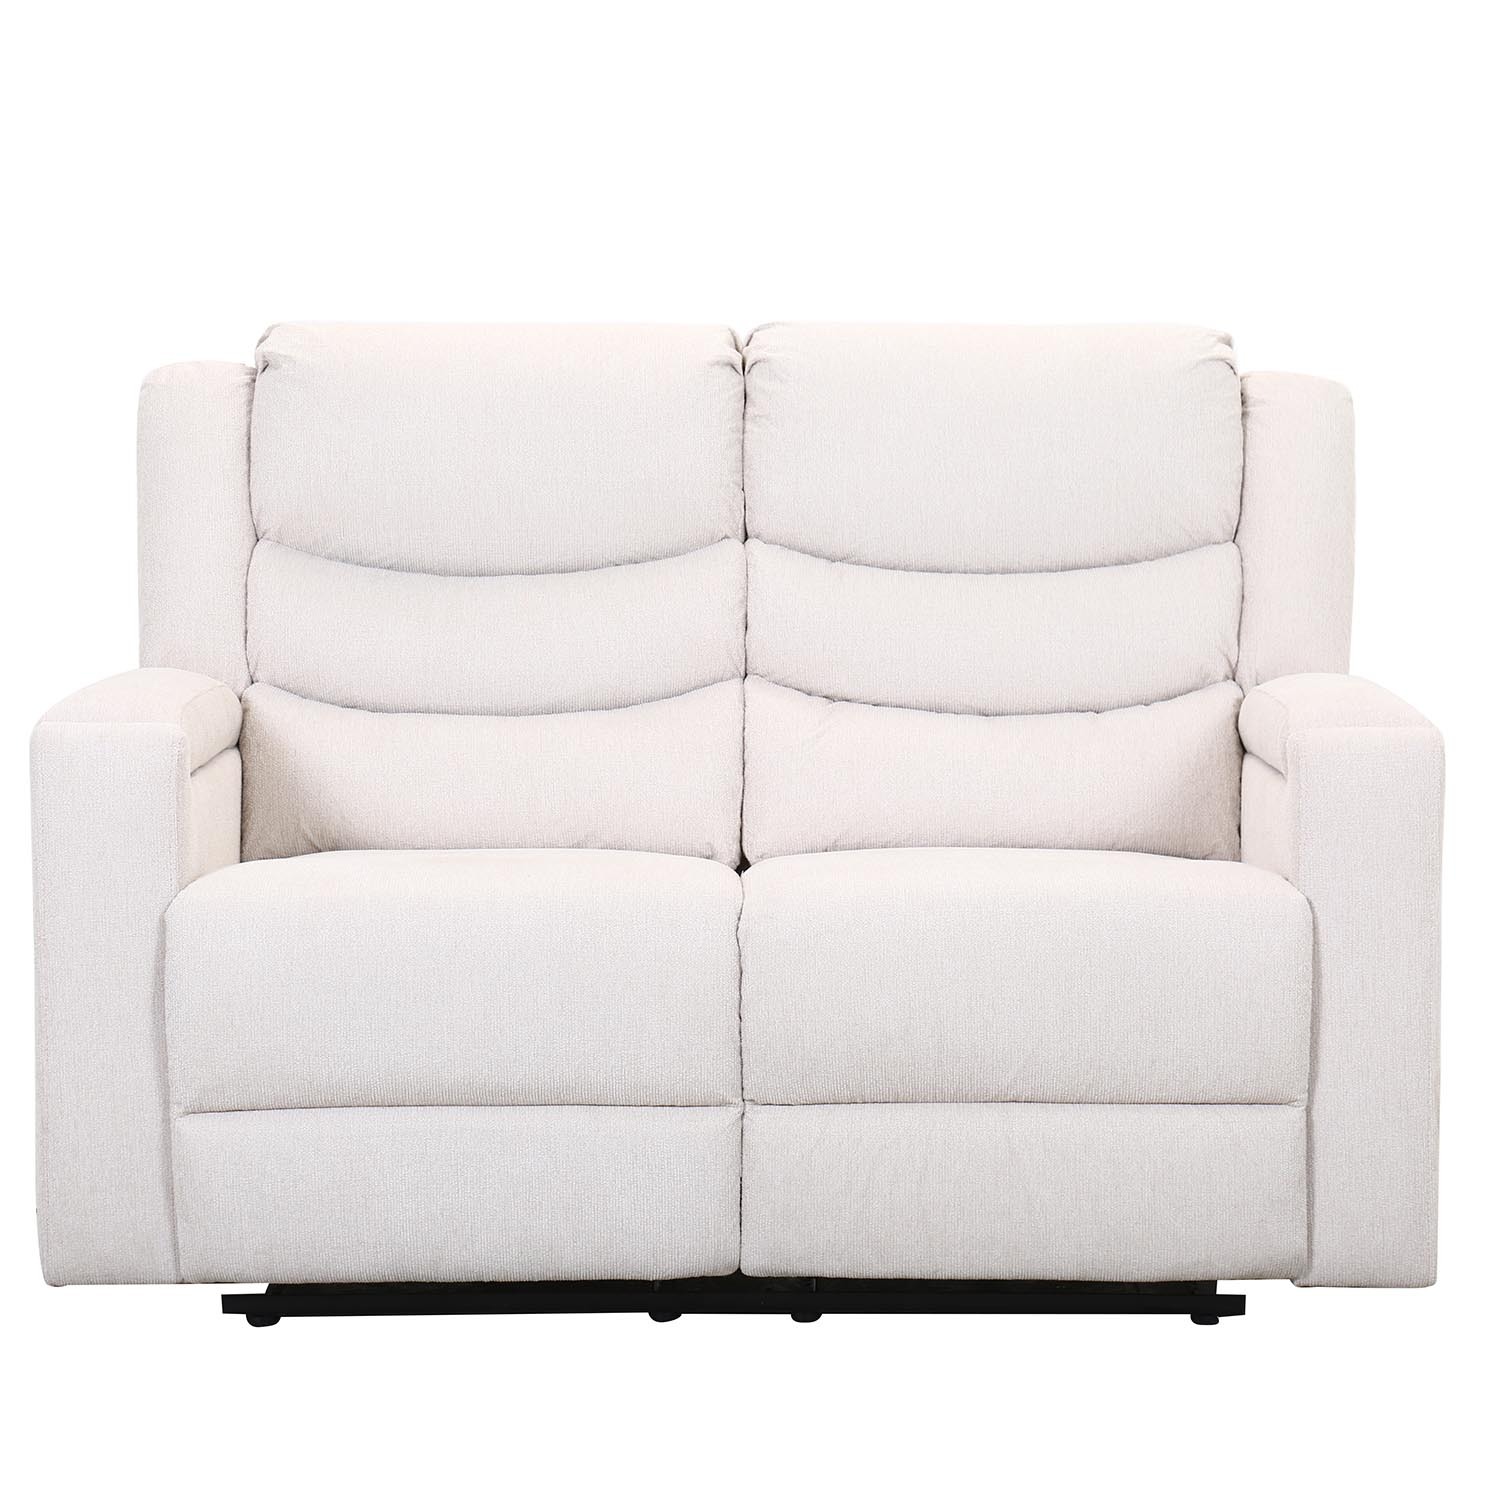 Heritage 2 Seater Ivory Recliner Sofa Image 2